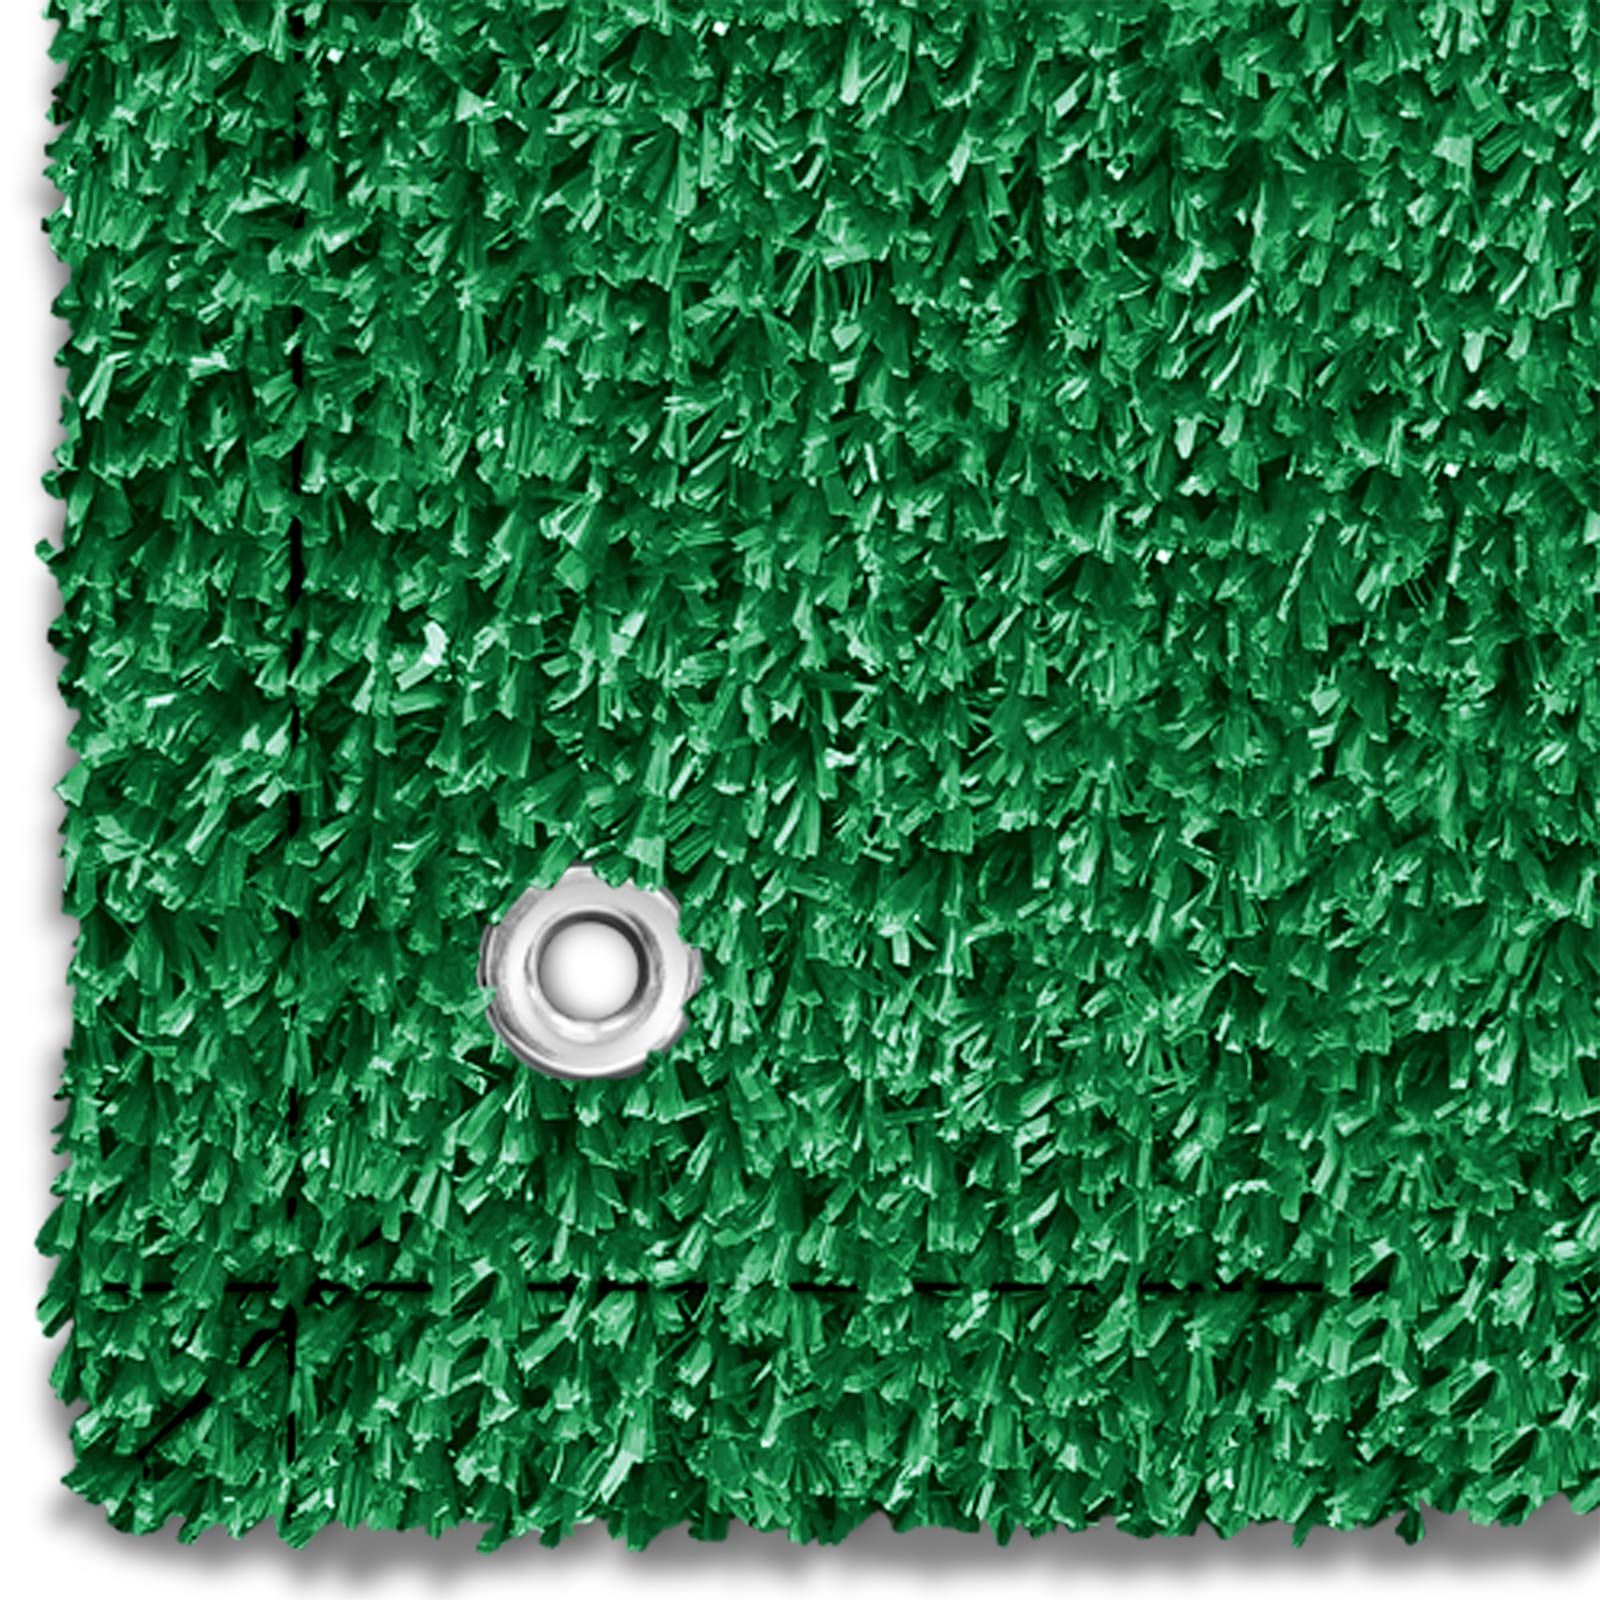 House, Home and More Outdoor Turf Rug - Green - 8' x 8'